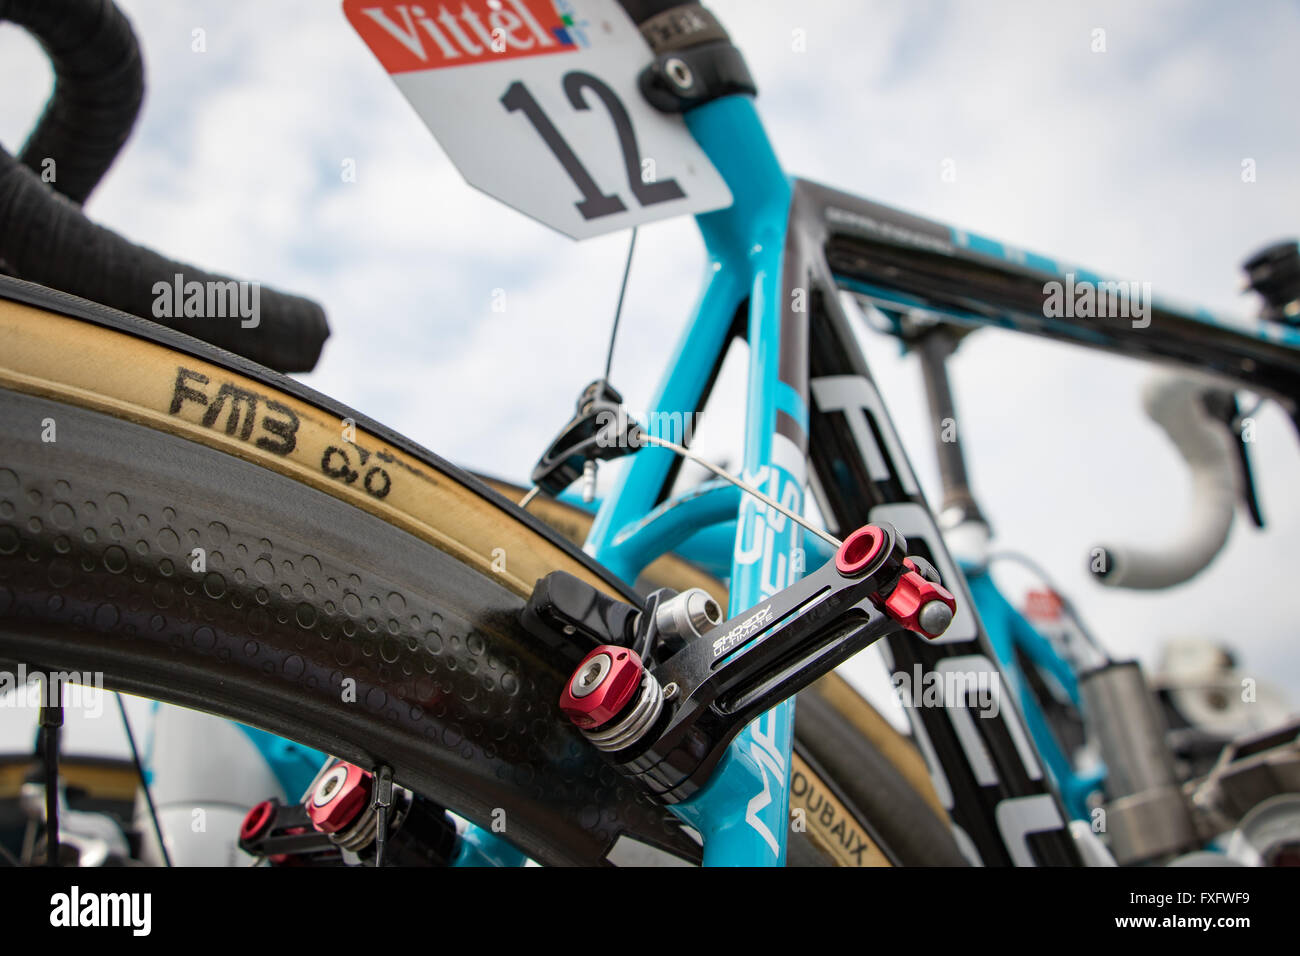 Seraing, Belgium. 7th July, 2015. Tour de France, Stage 4. In advance of cobblestone sectors on Stage 4, several teams prepare alternate bikes for riders to swap mid-race. The AG2R - La Mondiale team had several cantilever-equipped Focus Mares cyclocross bikes to compliment riders' standard issue Izalco Max road bikes. John Kavouris/Alamy Live News Stock Photo